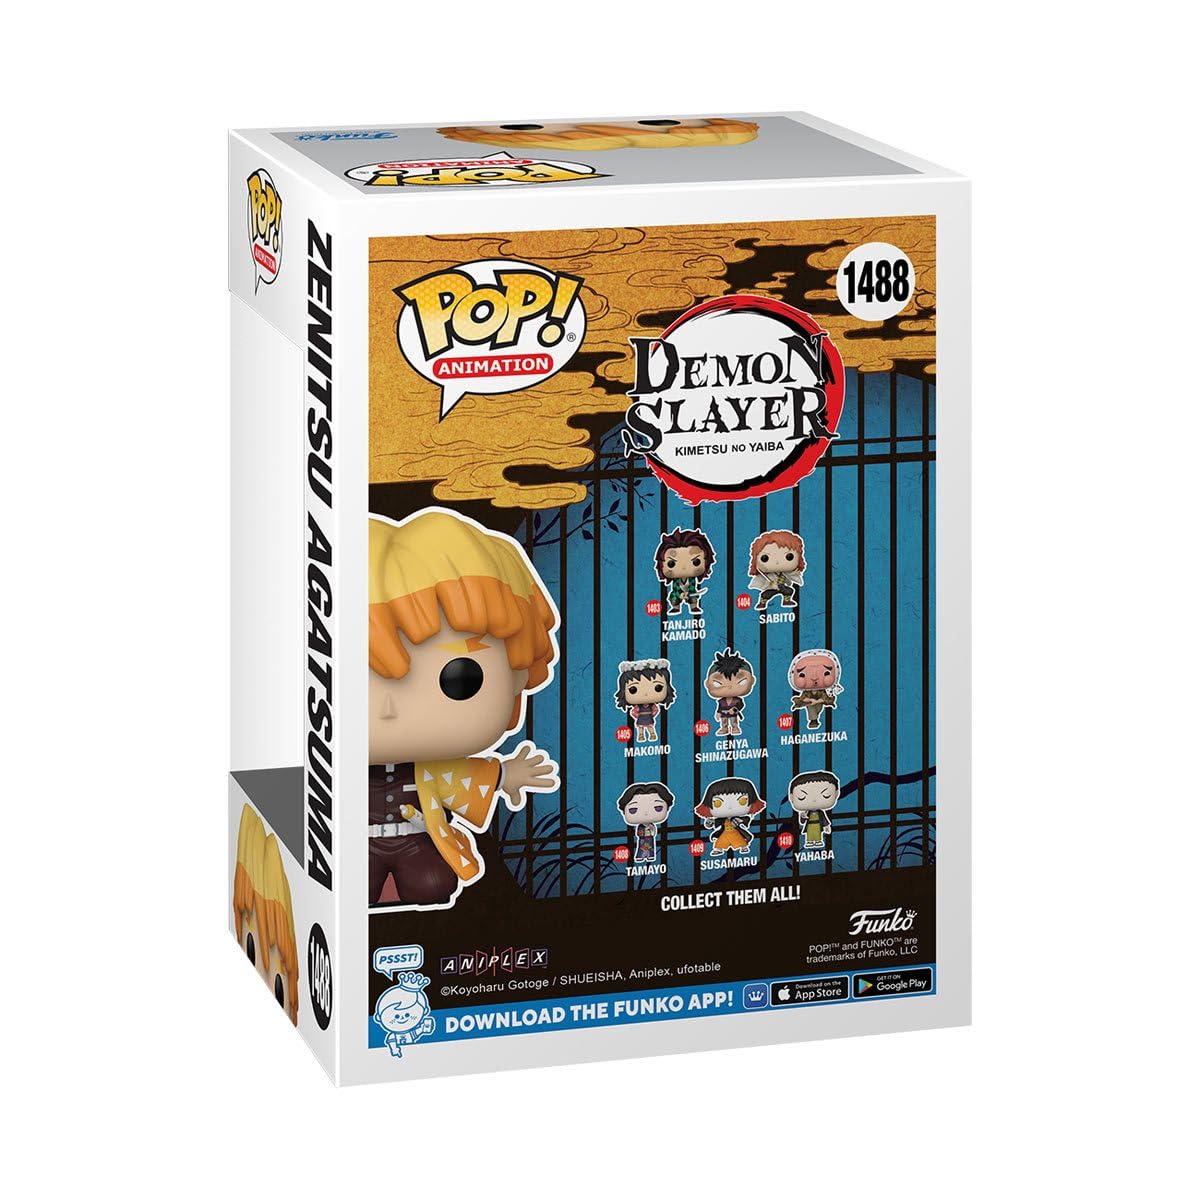 Funko POP! Animation - Demon Slayer - Zenitsu - (Laying) - Collectable Vinyl Figure - Gift Idea - Official Merchandise - Toys for Kids & Adults - Anime Fans - Model Figure for Collectors and Display